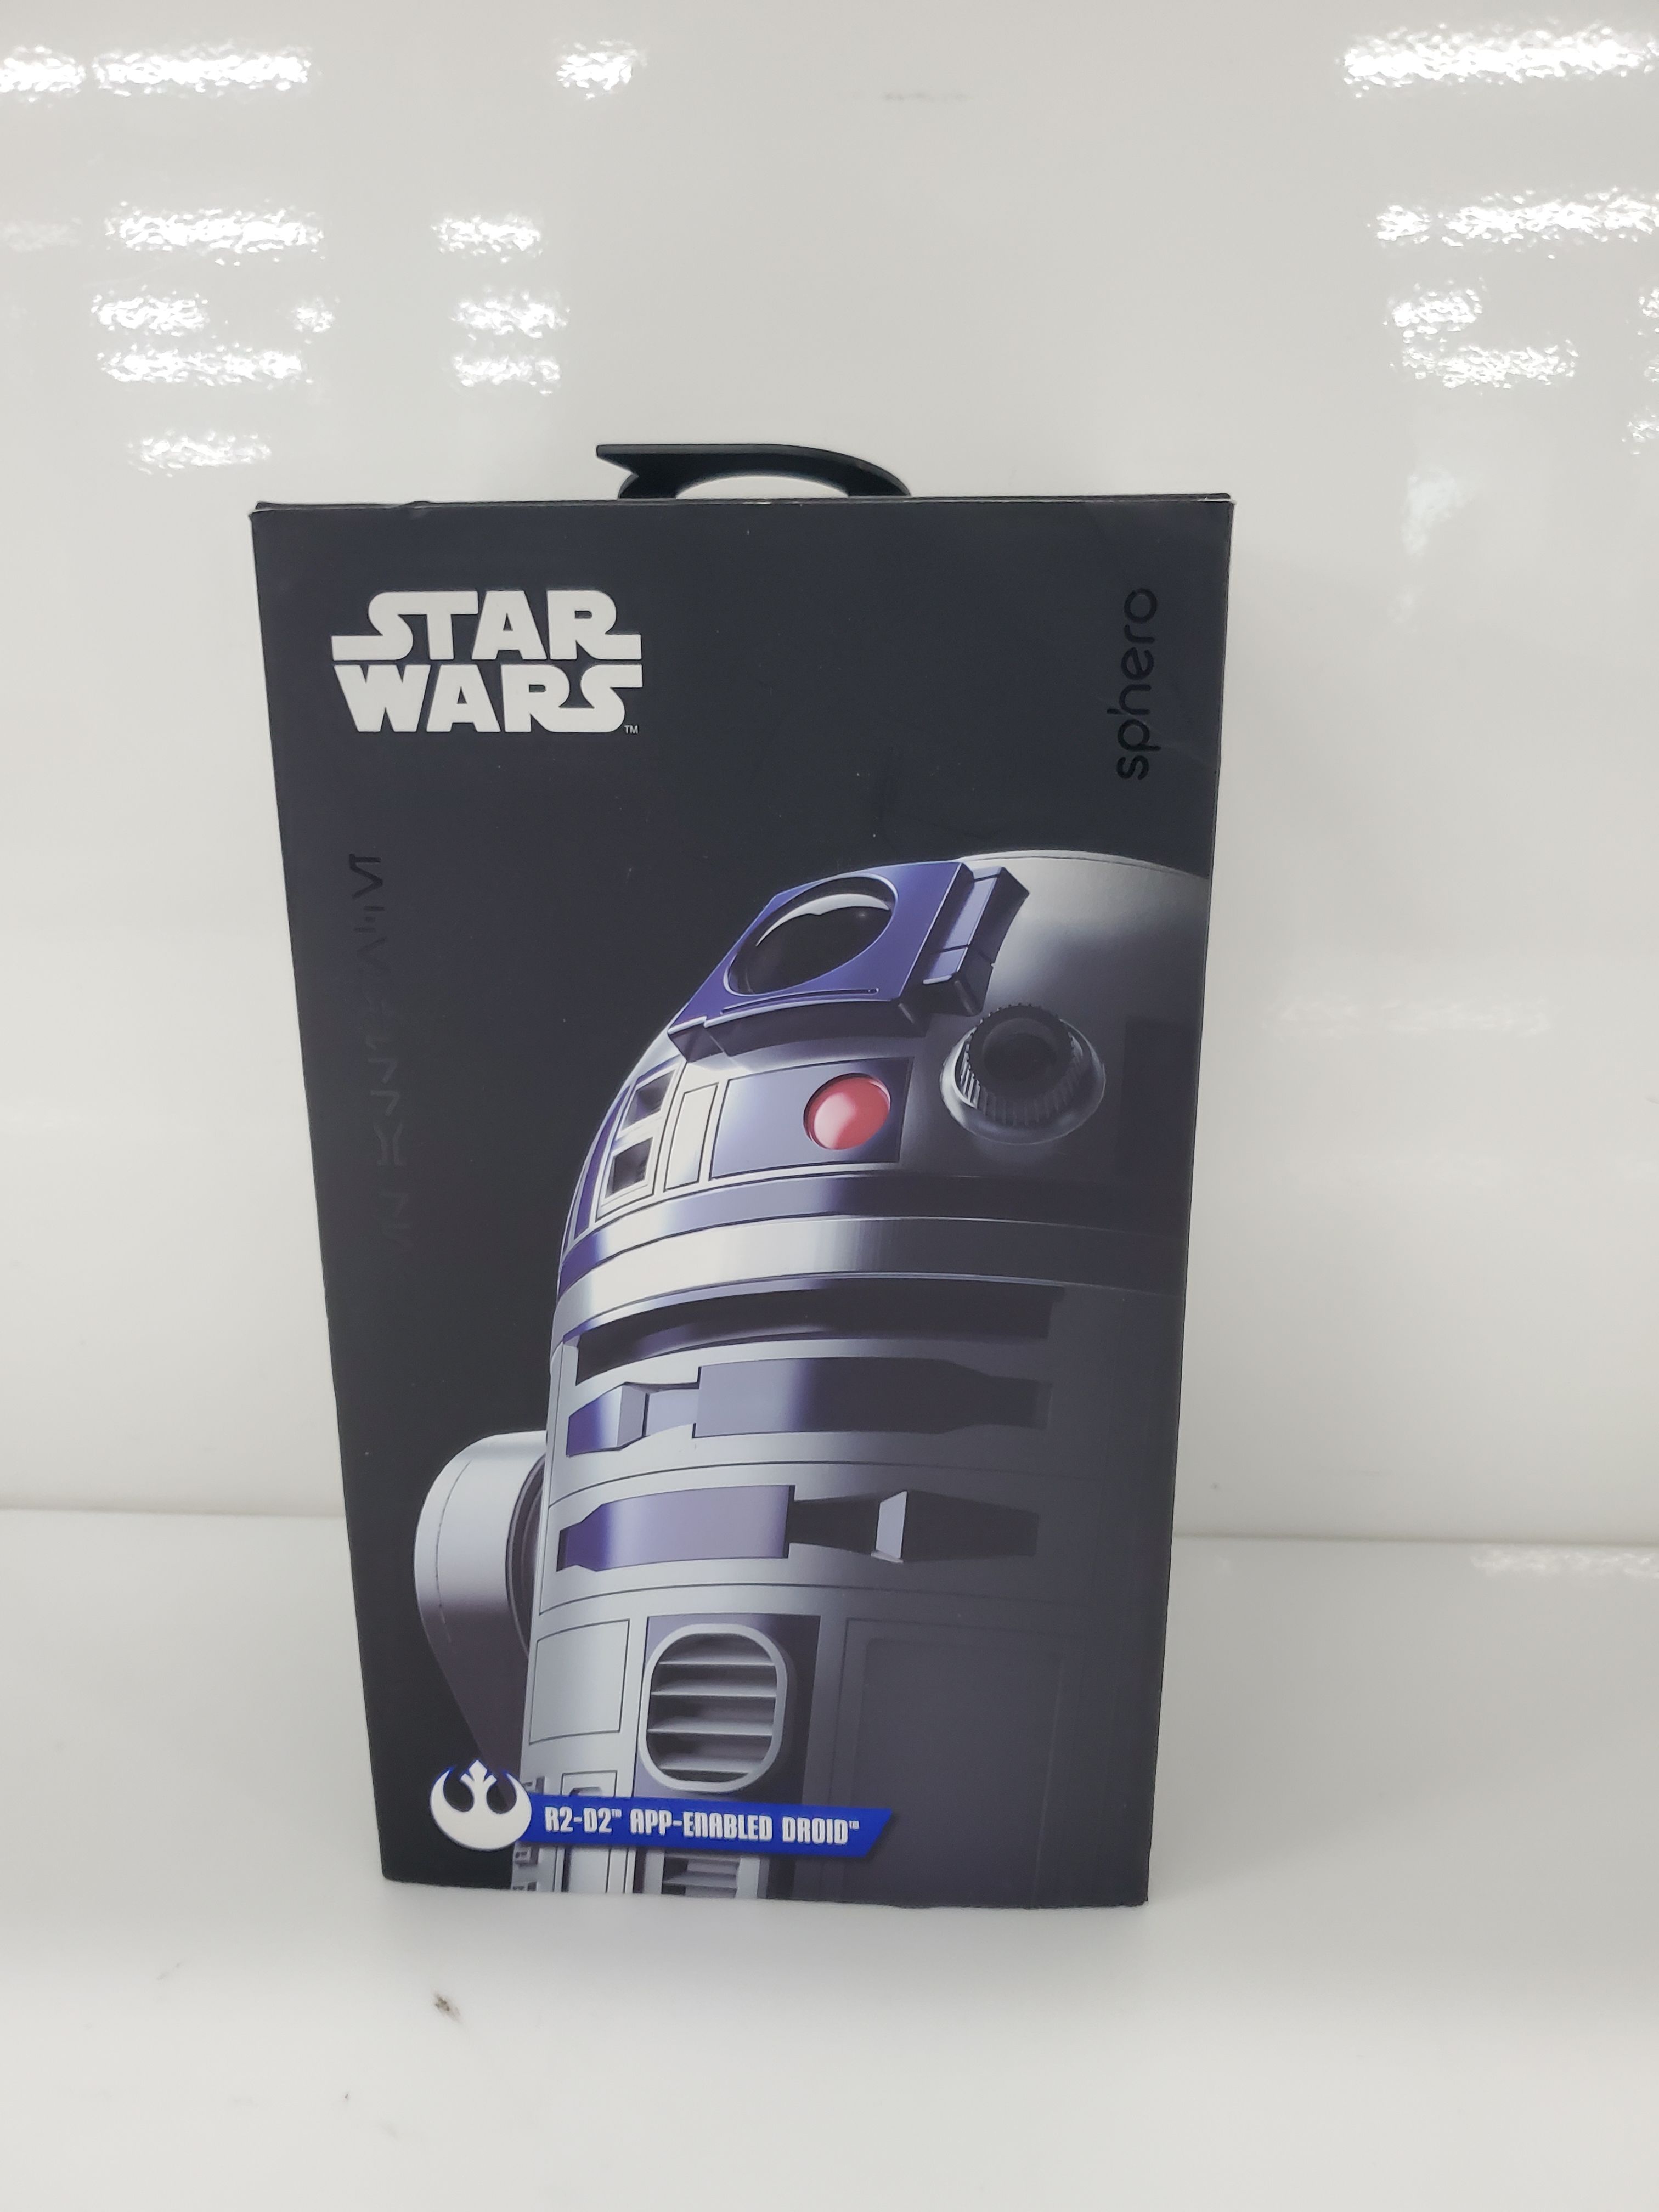 Buy the Sphero Star Wars R2-D2 App-Enabled Droid | GoodwillFinds